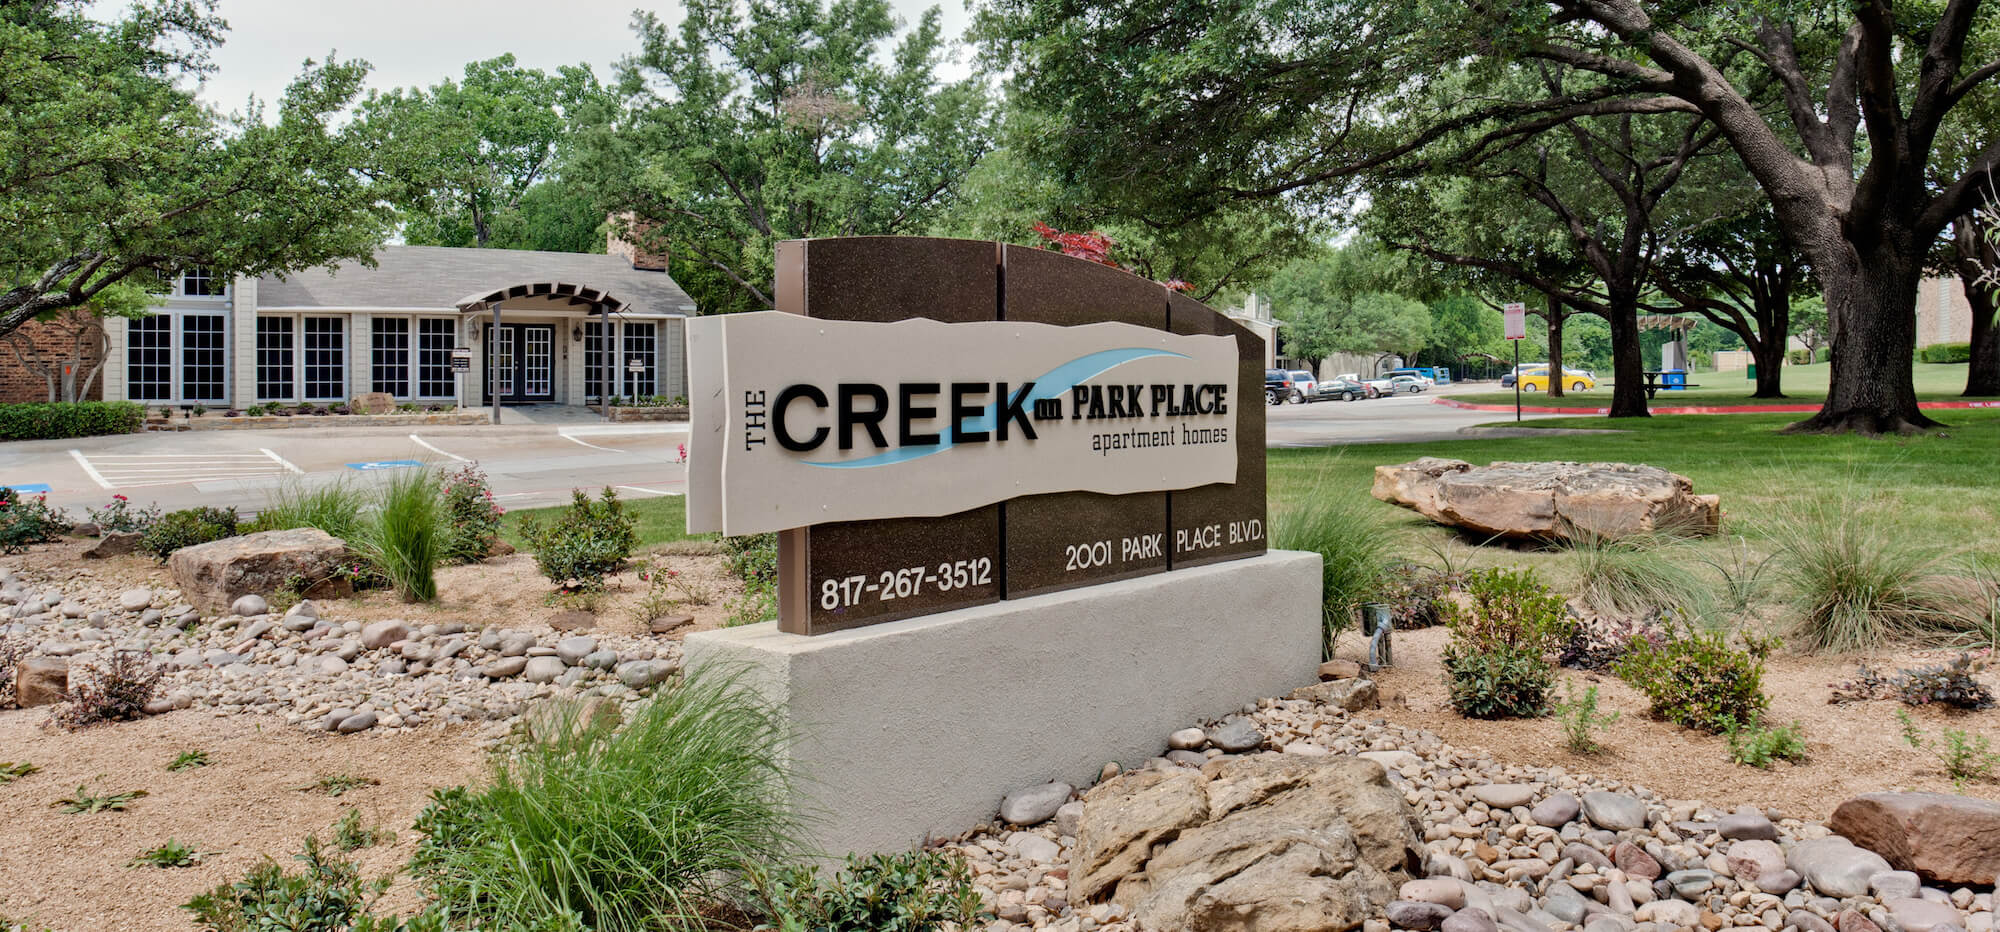 The Creek on Park Place signage